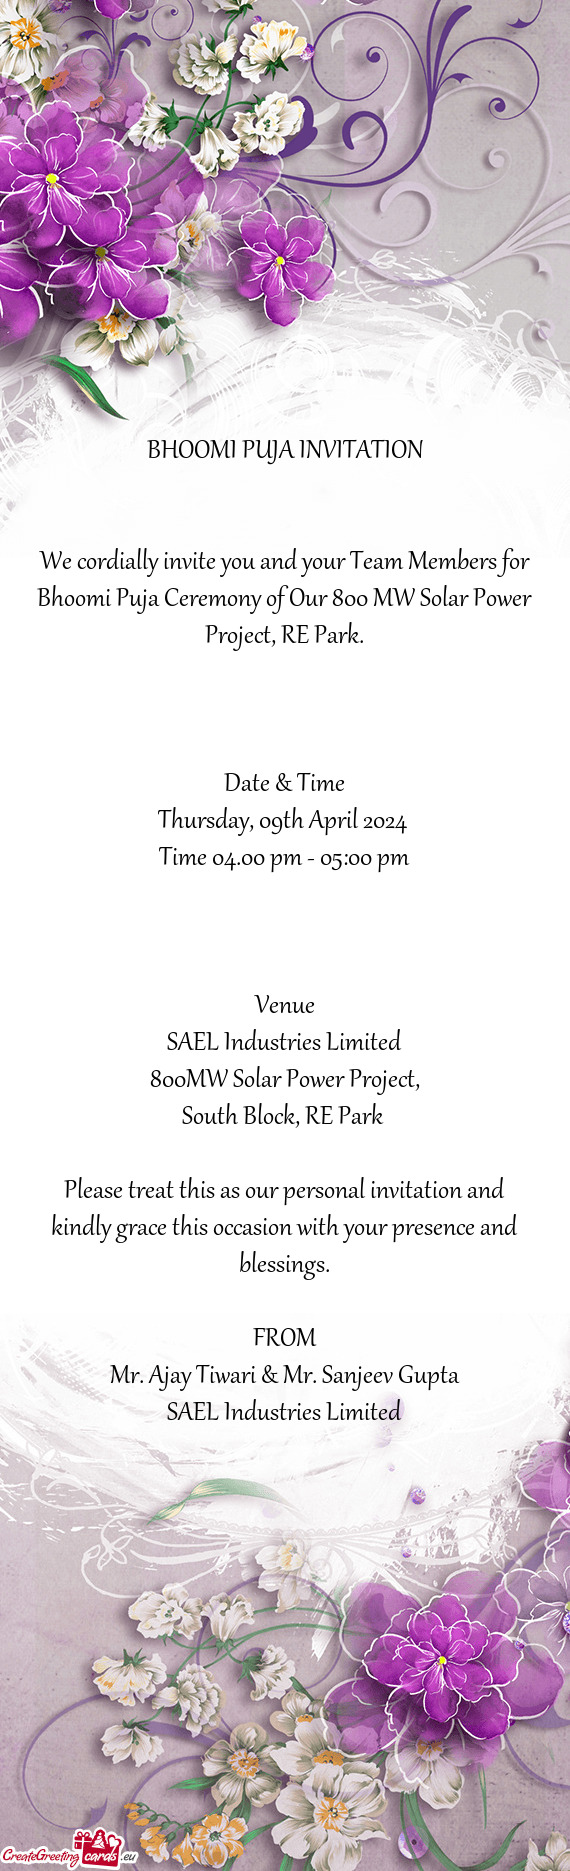 We cordially invite you and your Team Members for Bhoomi Puja Ceremony of Our 800 MW Solar Power Pro